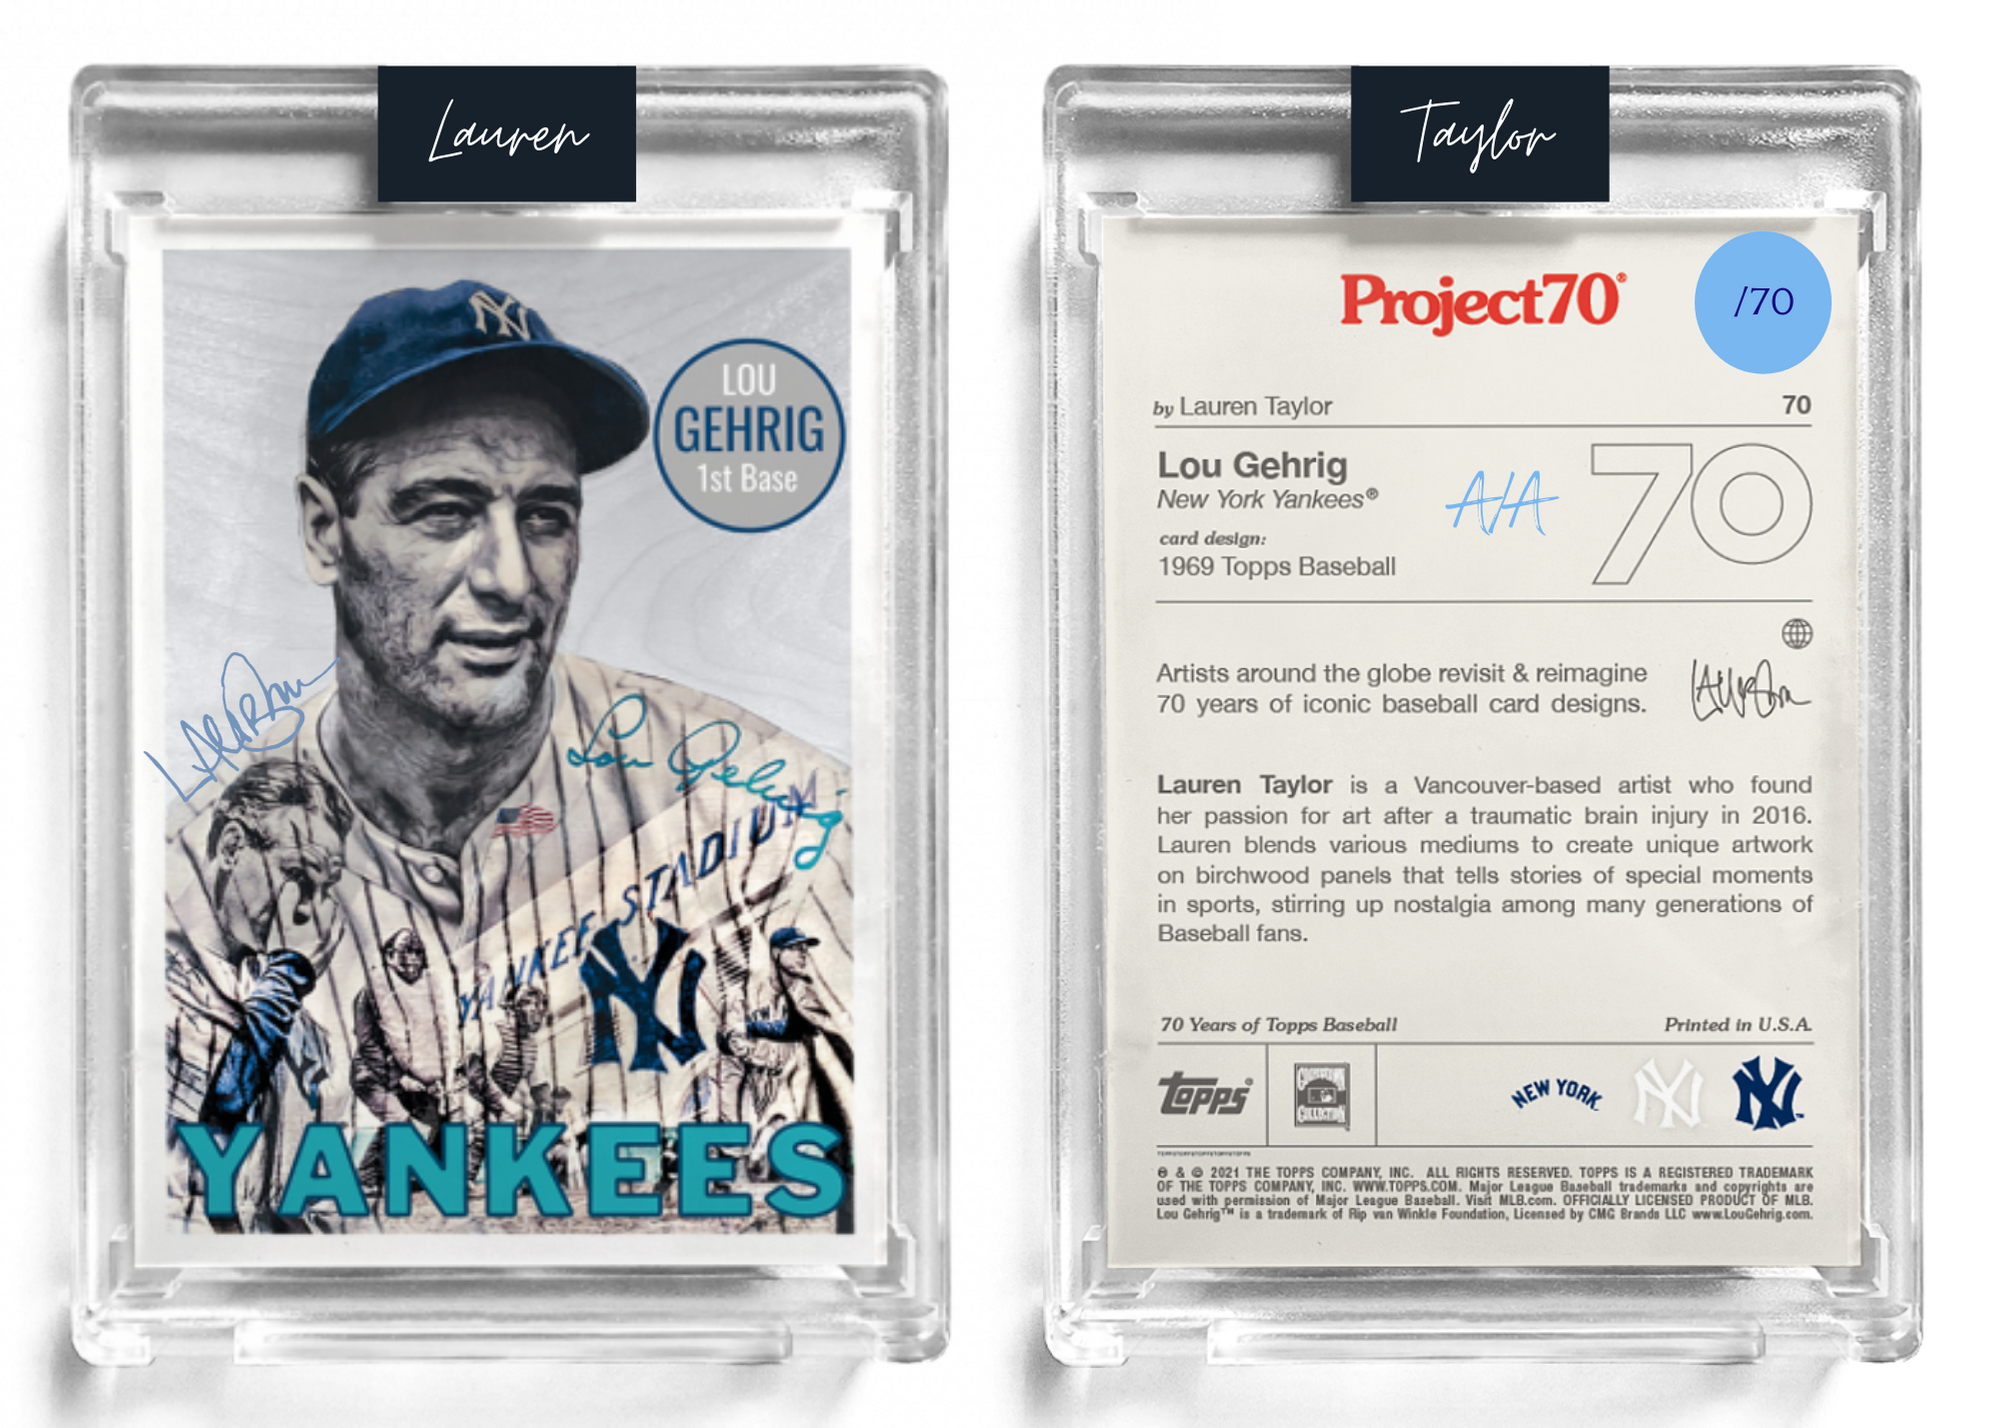 /70 Baby Blue Artist Signature - Topps Project 70 130pt card #70 by Lauren Taylor - Lou Gehrig